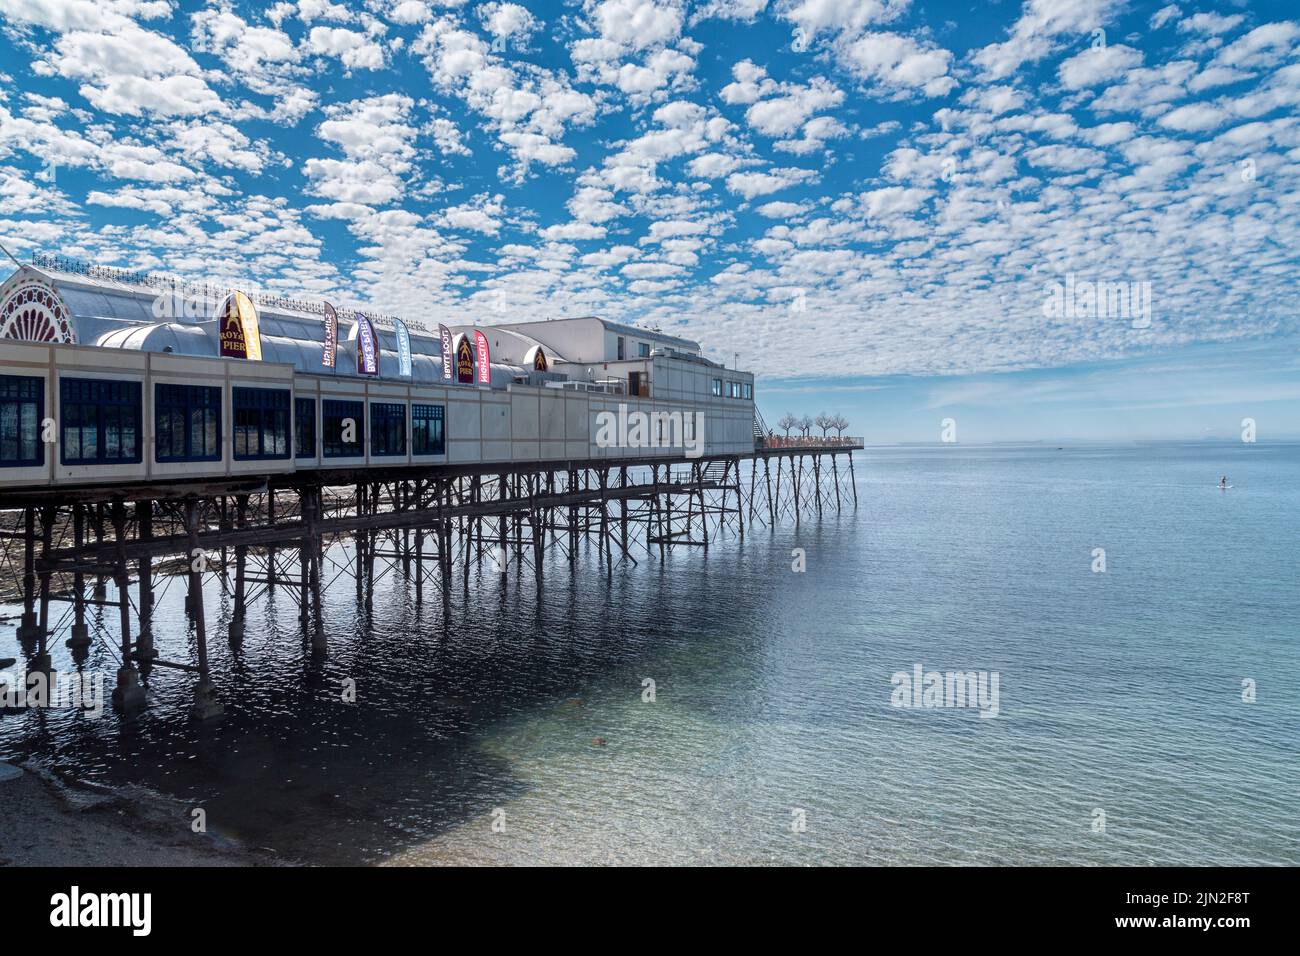 The Royal Pier at Aberystwyth stretching out into the sea toward the horizon. Above it a Mackerel sky aka Altocumulus clouds. Stock Photo